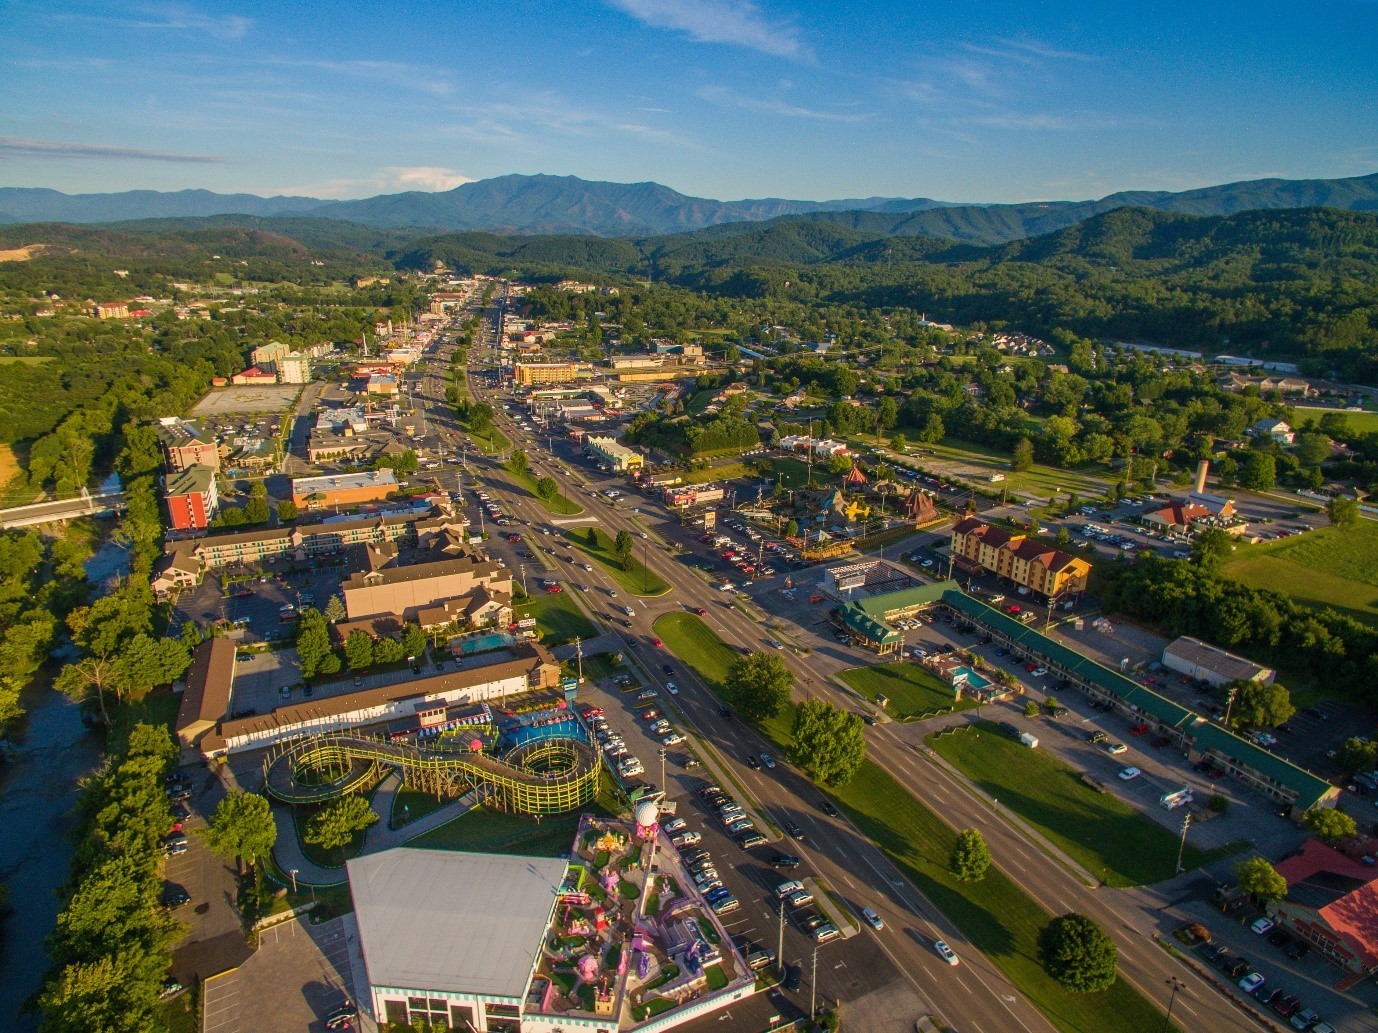 10 Tips for Navigating Pigeon Forge Like a Pro